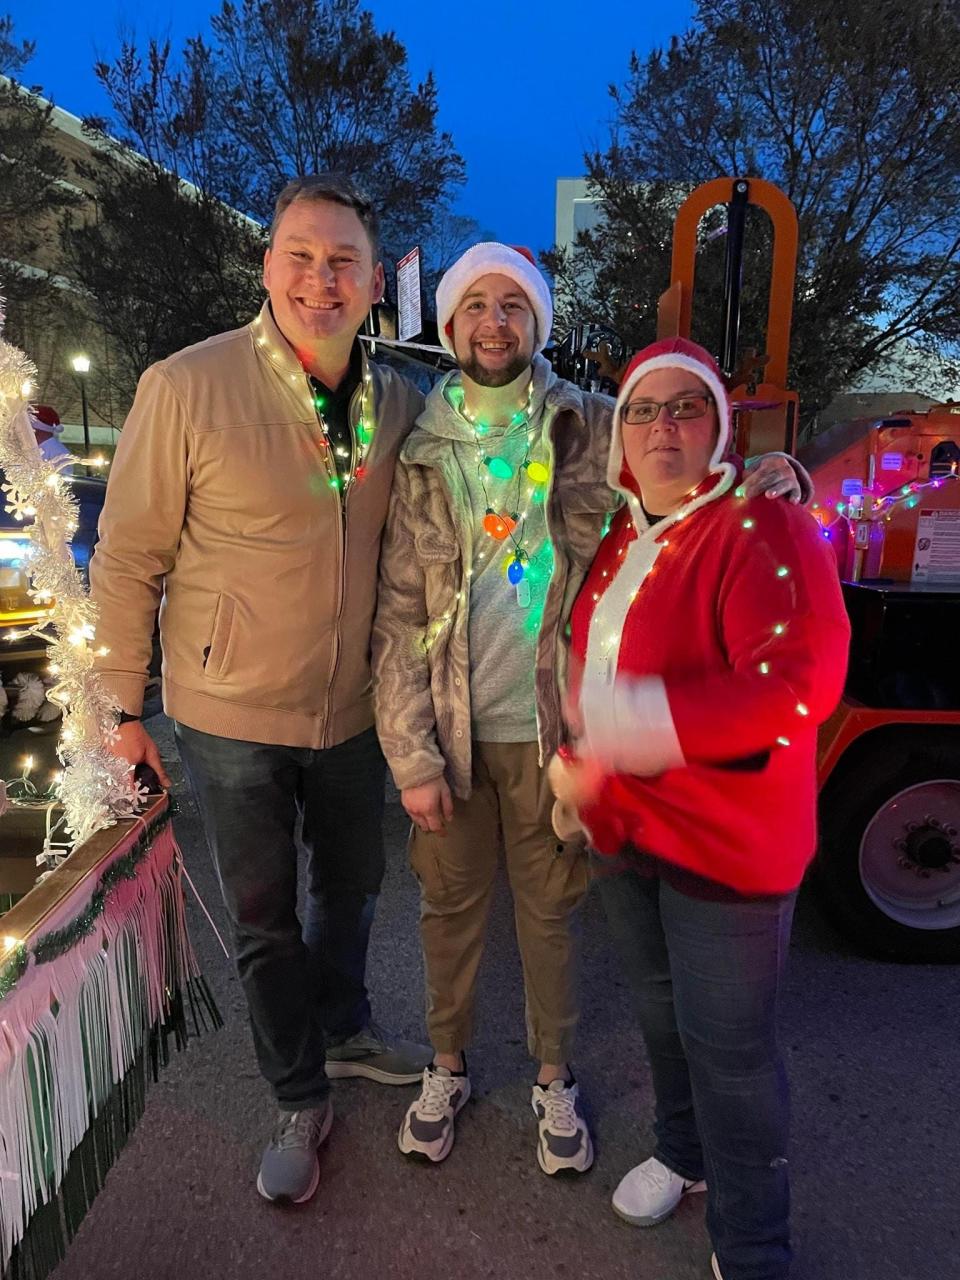 Big Brothers Big Sisters of Clarksville's marketing and communications director ​Joshua Peltz, community based program specialist Kyle Pearce and program manager Thomasa Munroe at the 2023 Clarksville Christmas Parade.